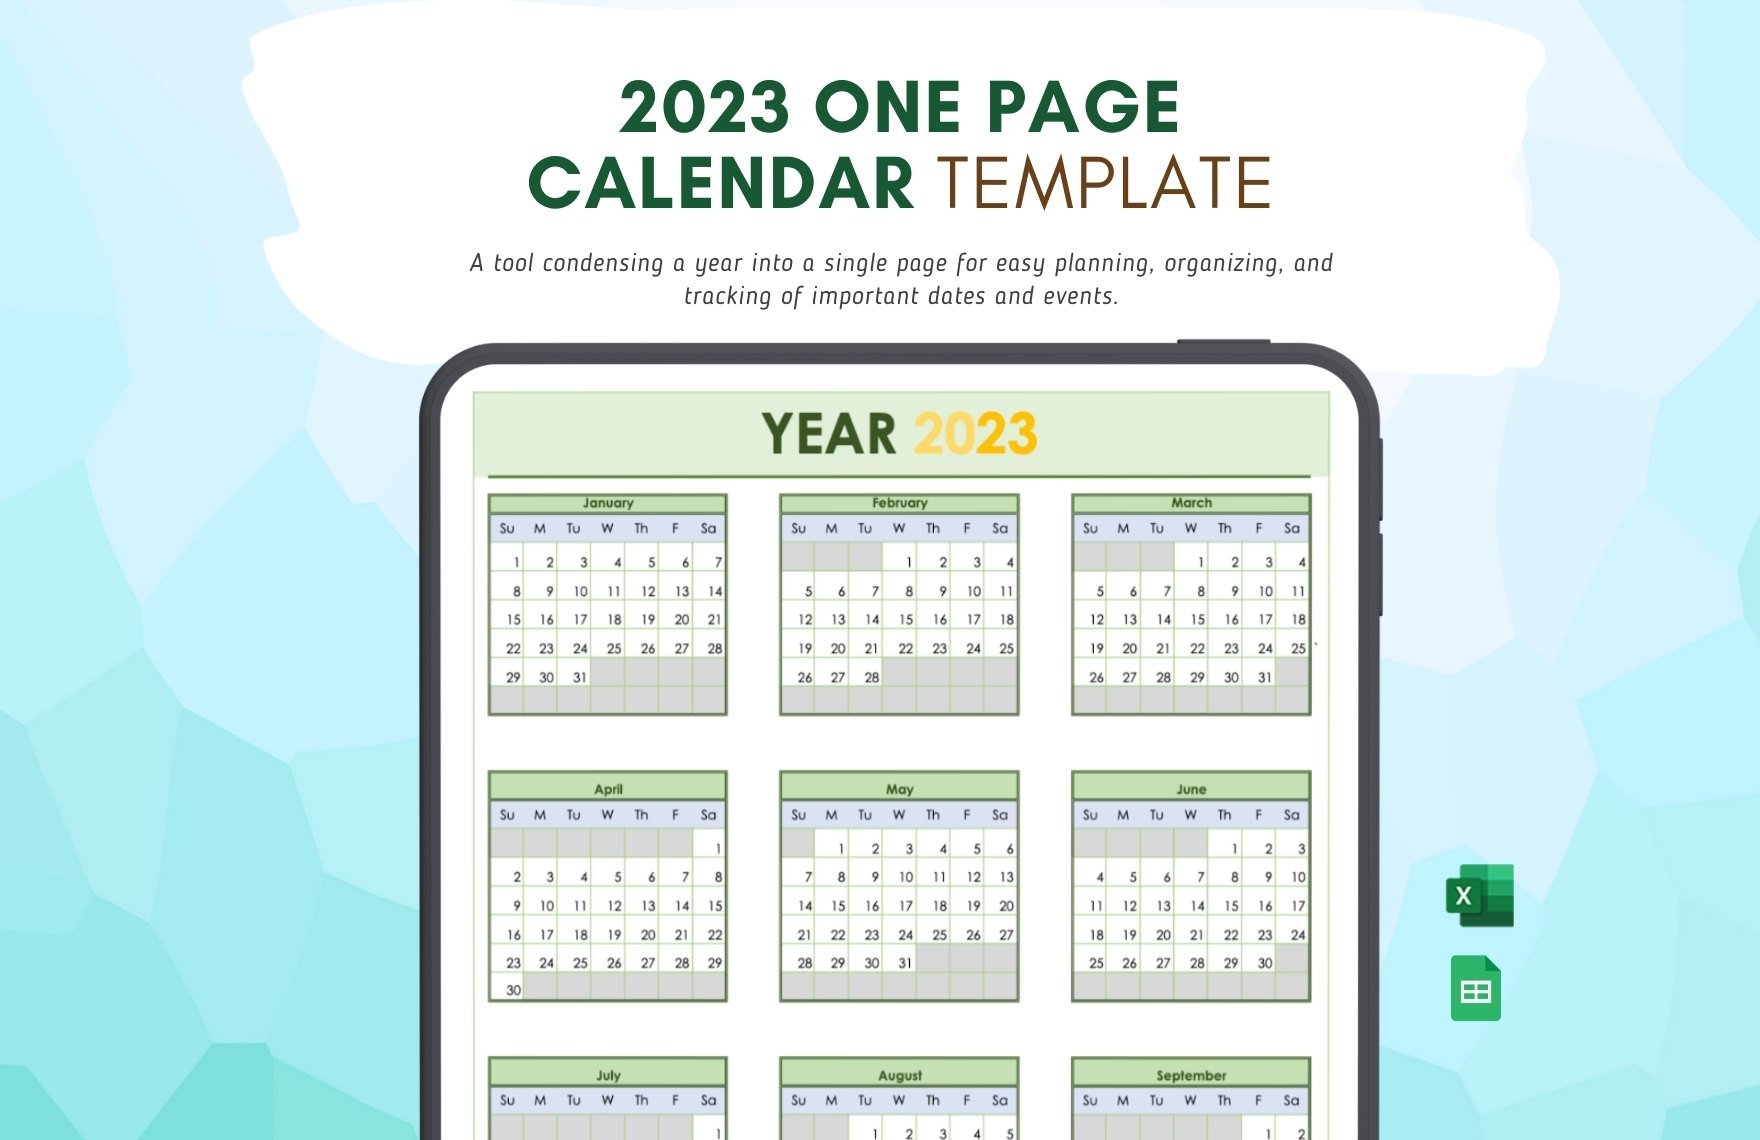 2023 One Page Calendar